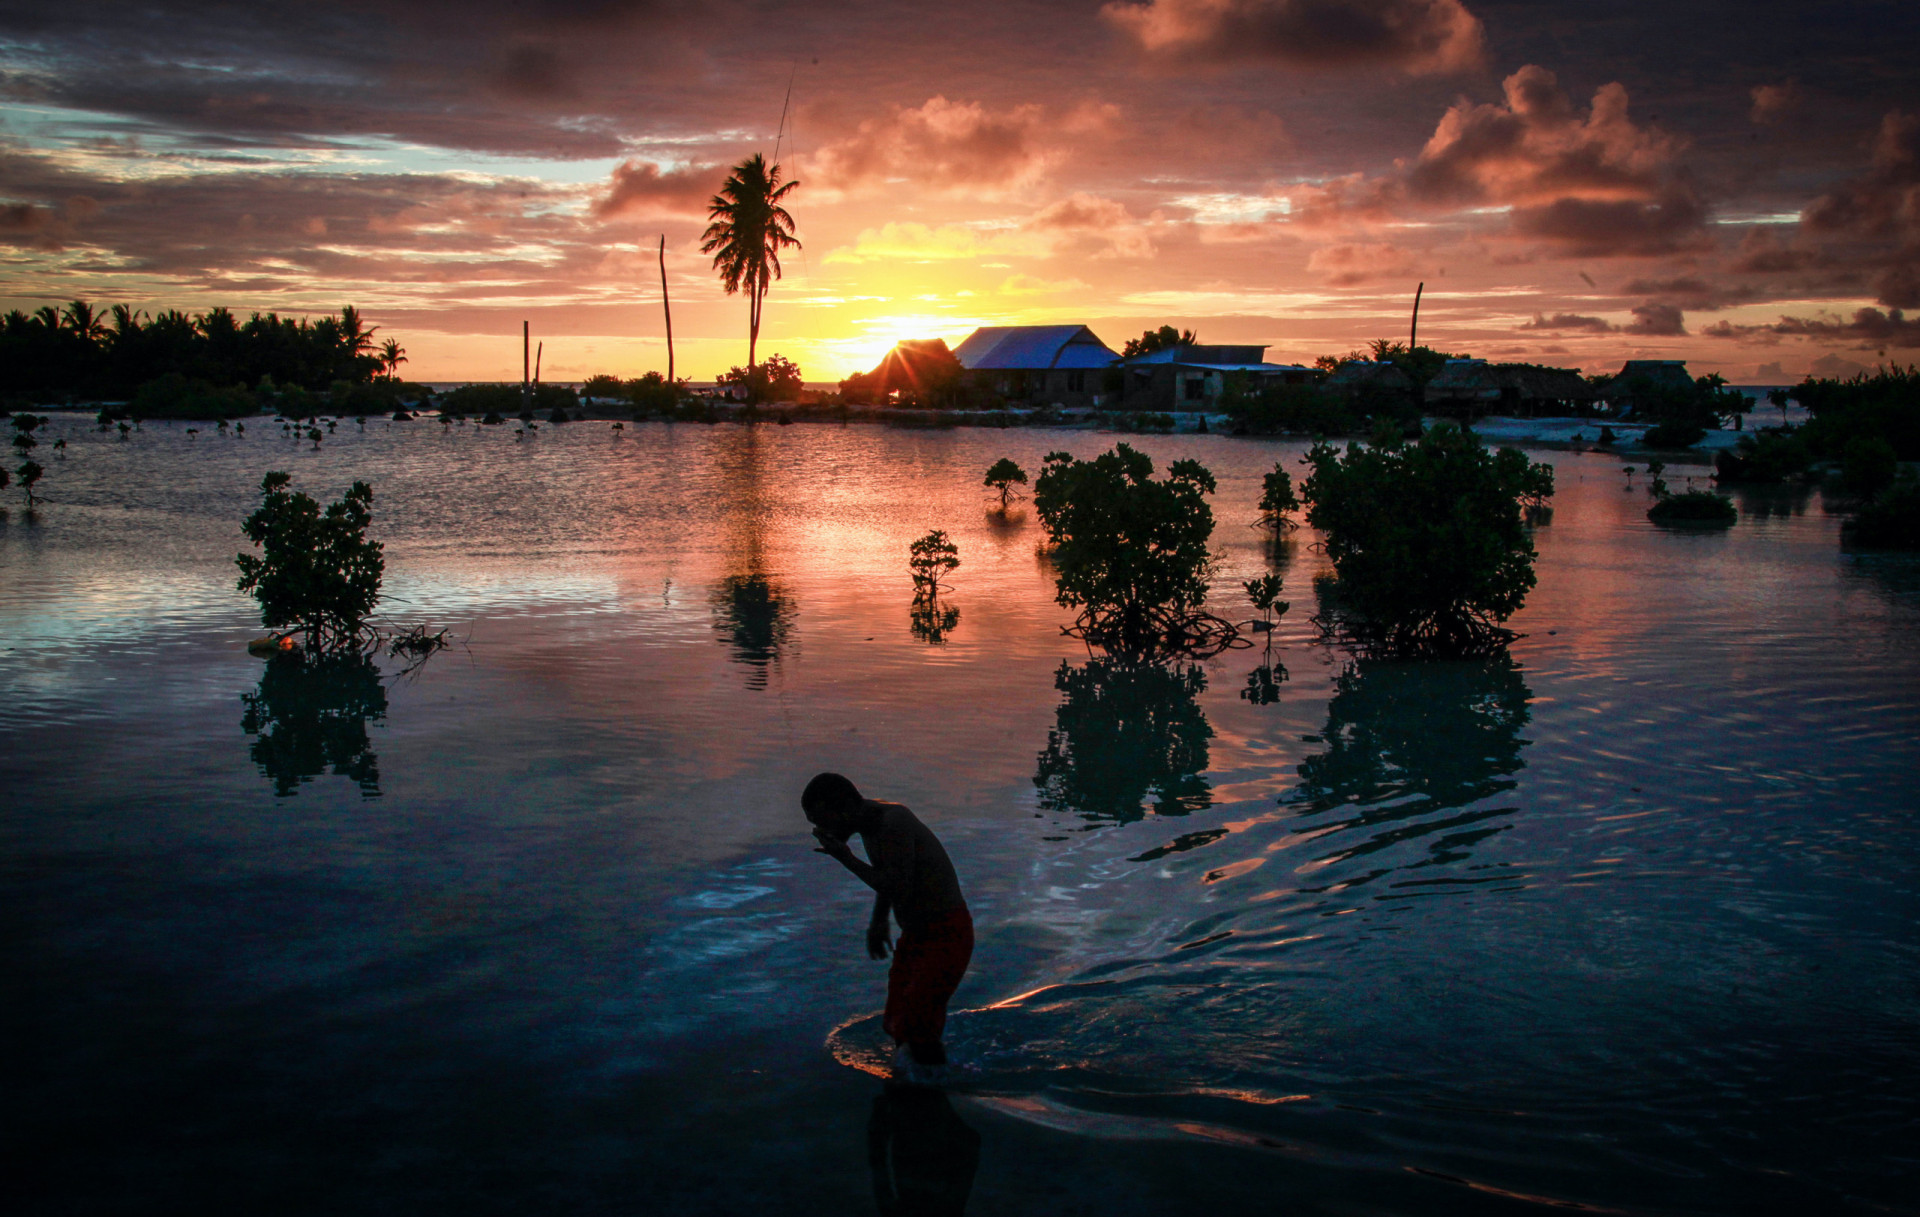 <p>Due to its location, Kiribati faces many significant environmental challenges, including coastal erosion, saltwater intrusion, and the impacts of climate change, particularly with rising sea levels. Much of the country’s resources are spent on trying to maintain its unique cultural heritage in the face of globalization.</p> <p>Sources: (FOCUS on Geography) (WorldAtlas) (National Oceanic and Atmospheric Administration)</p> <p>See also: <a href="https://www.starsinsider.com/travel/385789/the-worlds-most-isolated-islands-and-locations">The world's most isolated islands and locations</a></p><p>You may also like: </p>